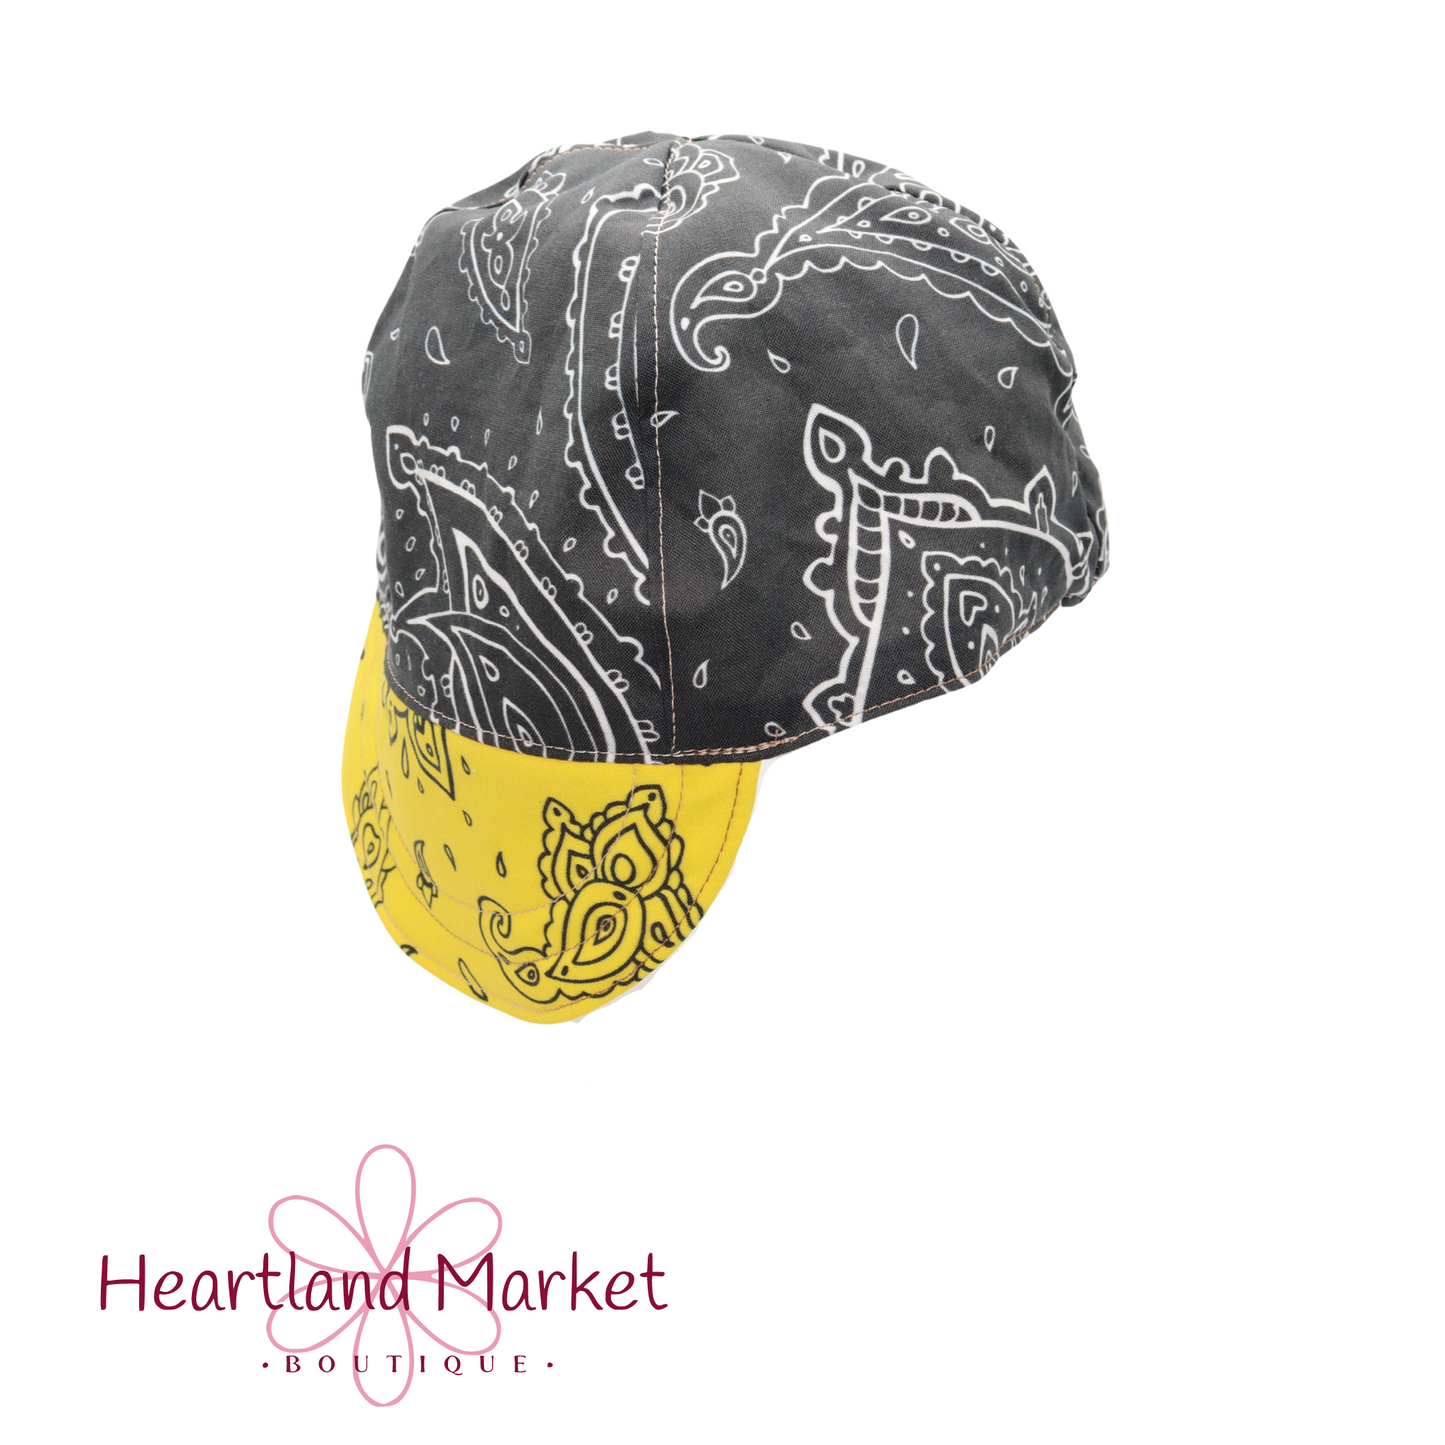 Gray and white paisley hat with yellow and paisley brim 100% cotton welding cap